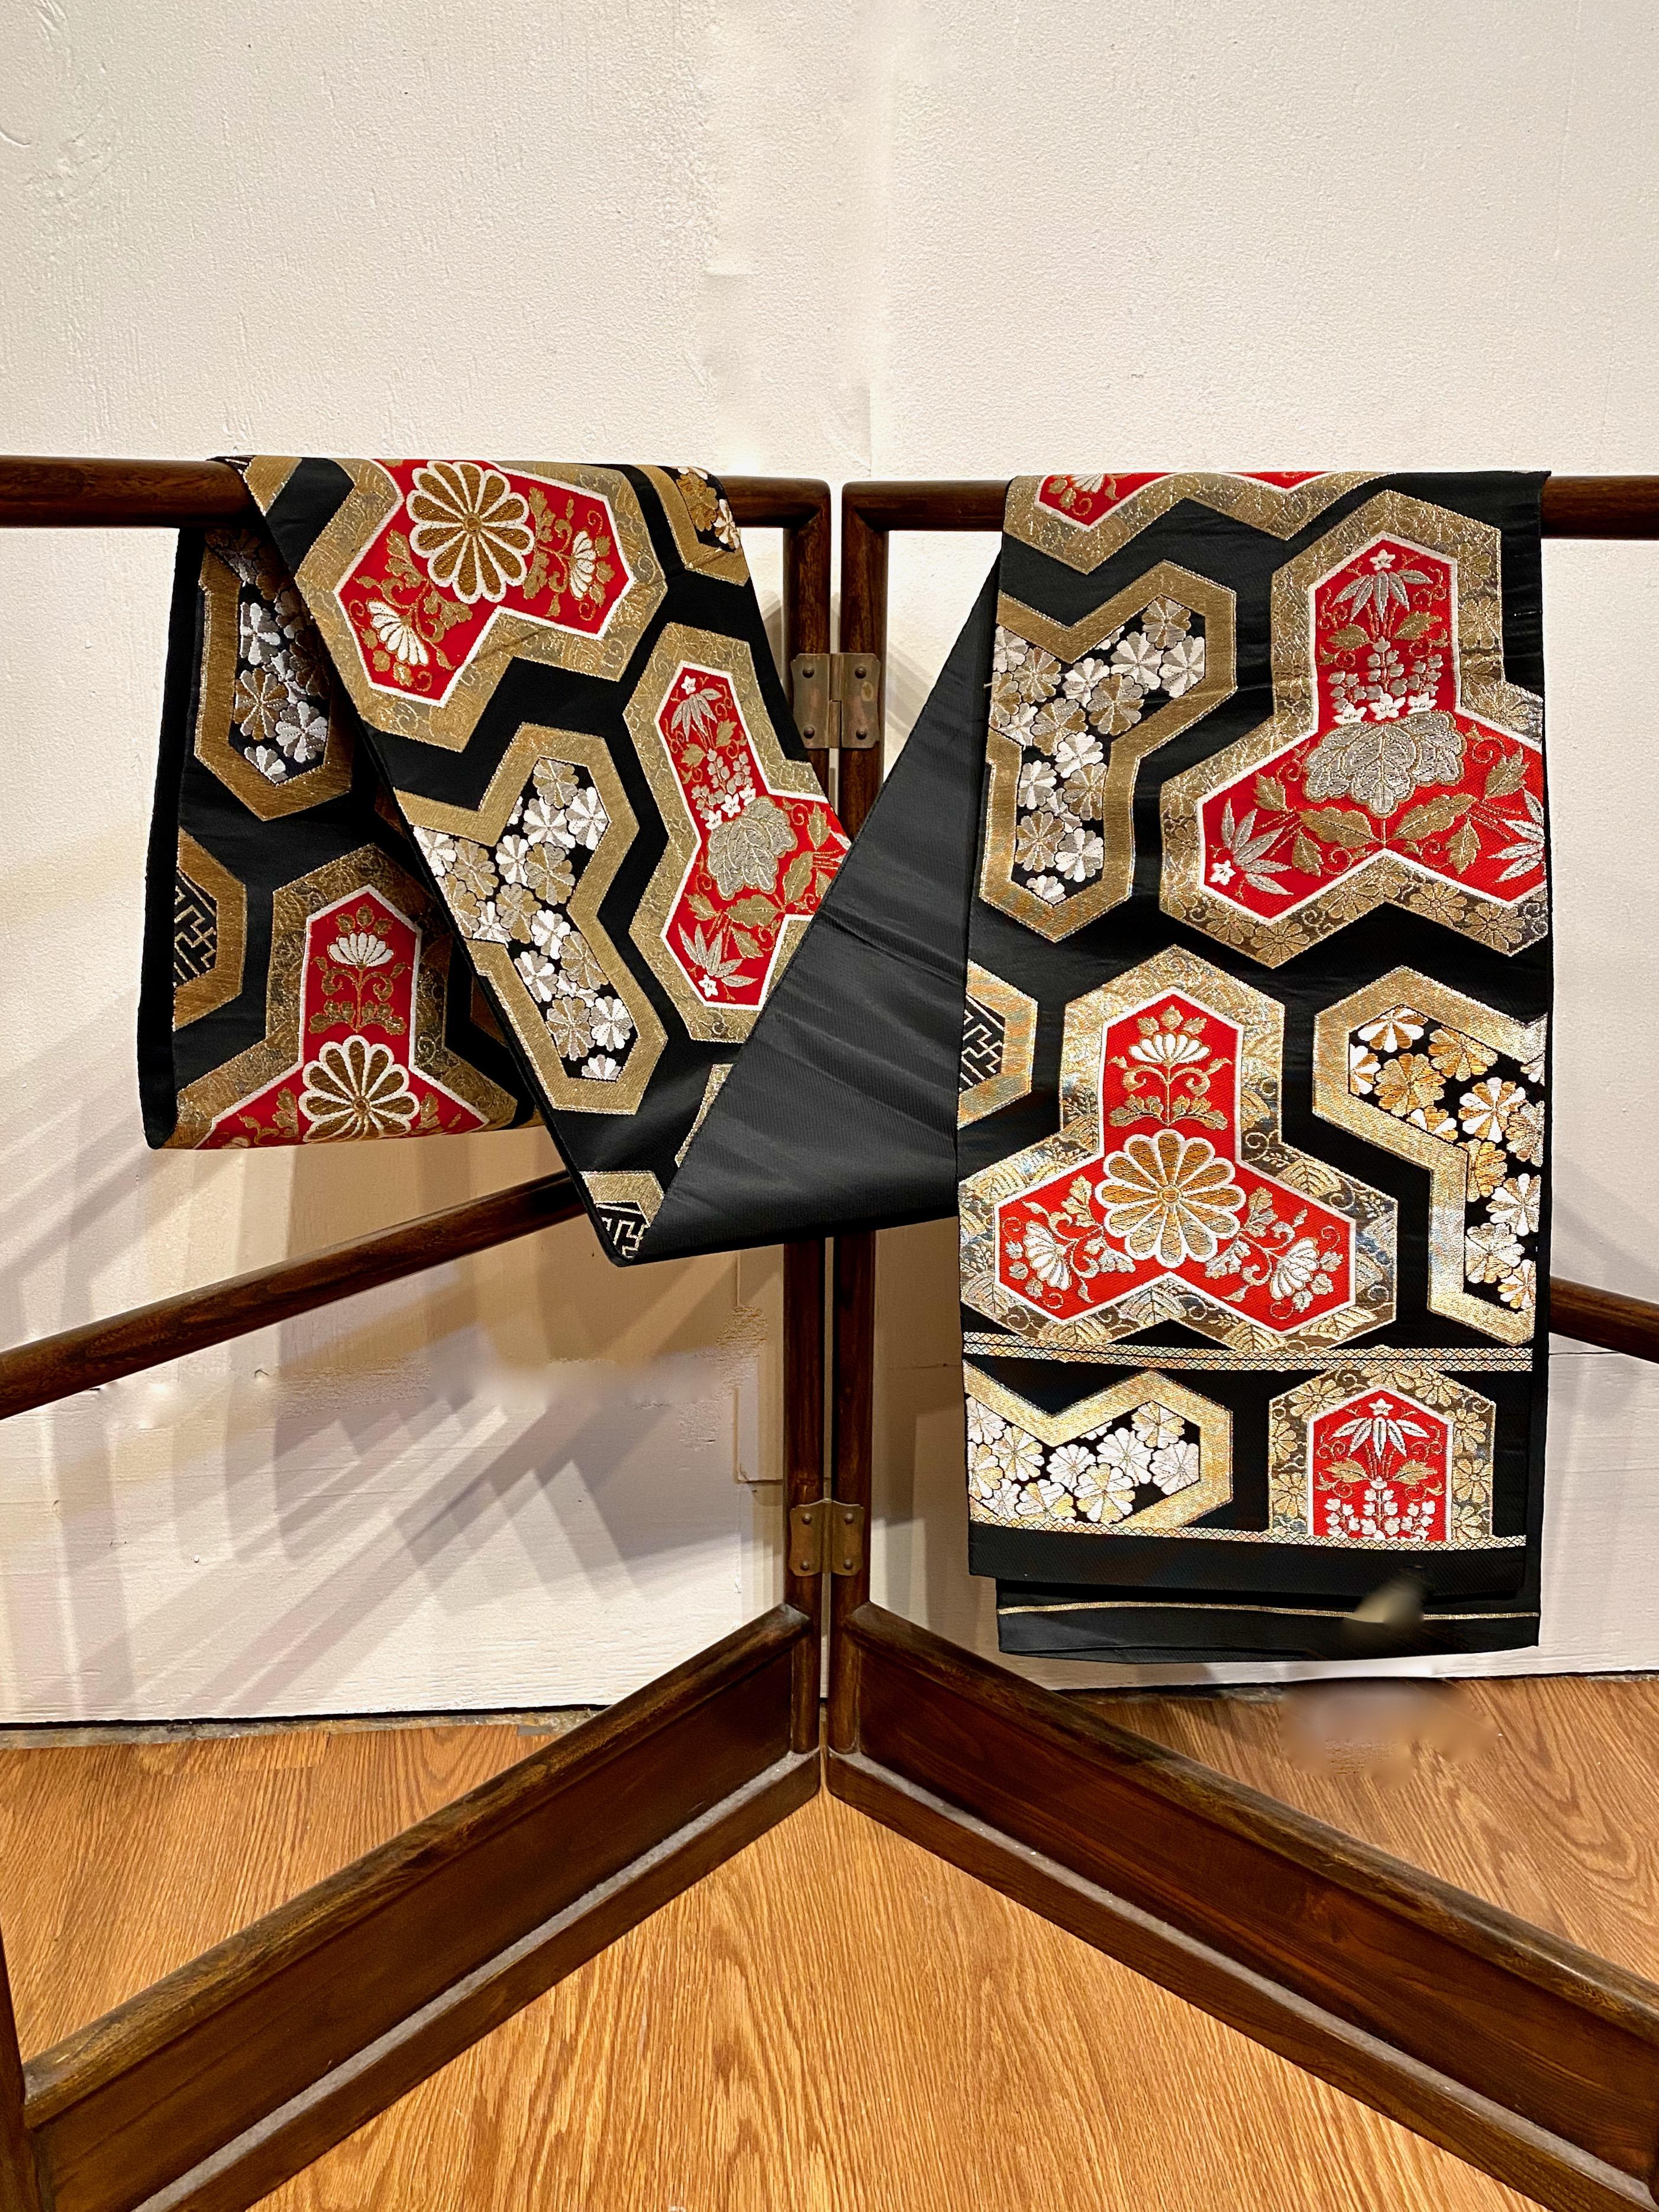 This is a stunning black silk obi that is decorated with red and gold reserves of brocade chrysanthemums. The design and quality of workmanship make this an exceptional obi that measures a very generous 160 inches in length by 13 wide. The brocade